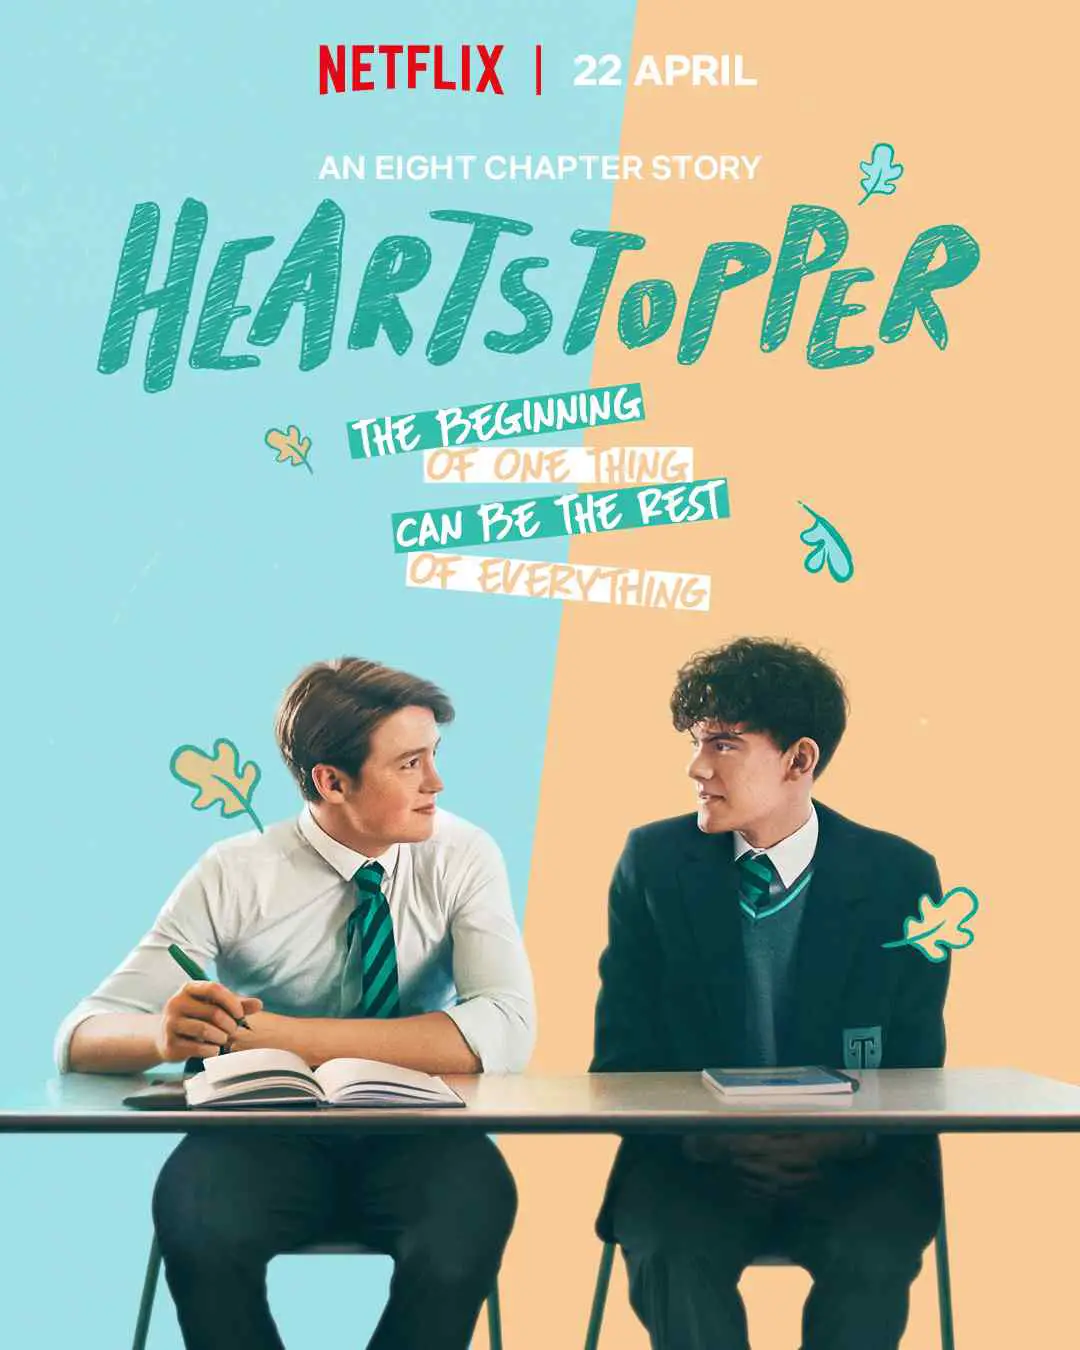 A graphic novel by Alice Oseman inspired the British romantic drama series Heartstopper.